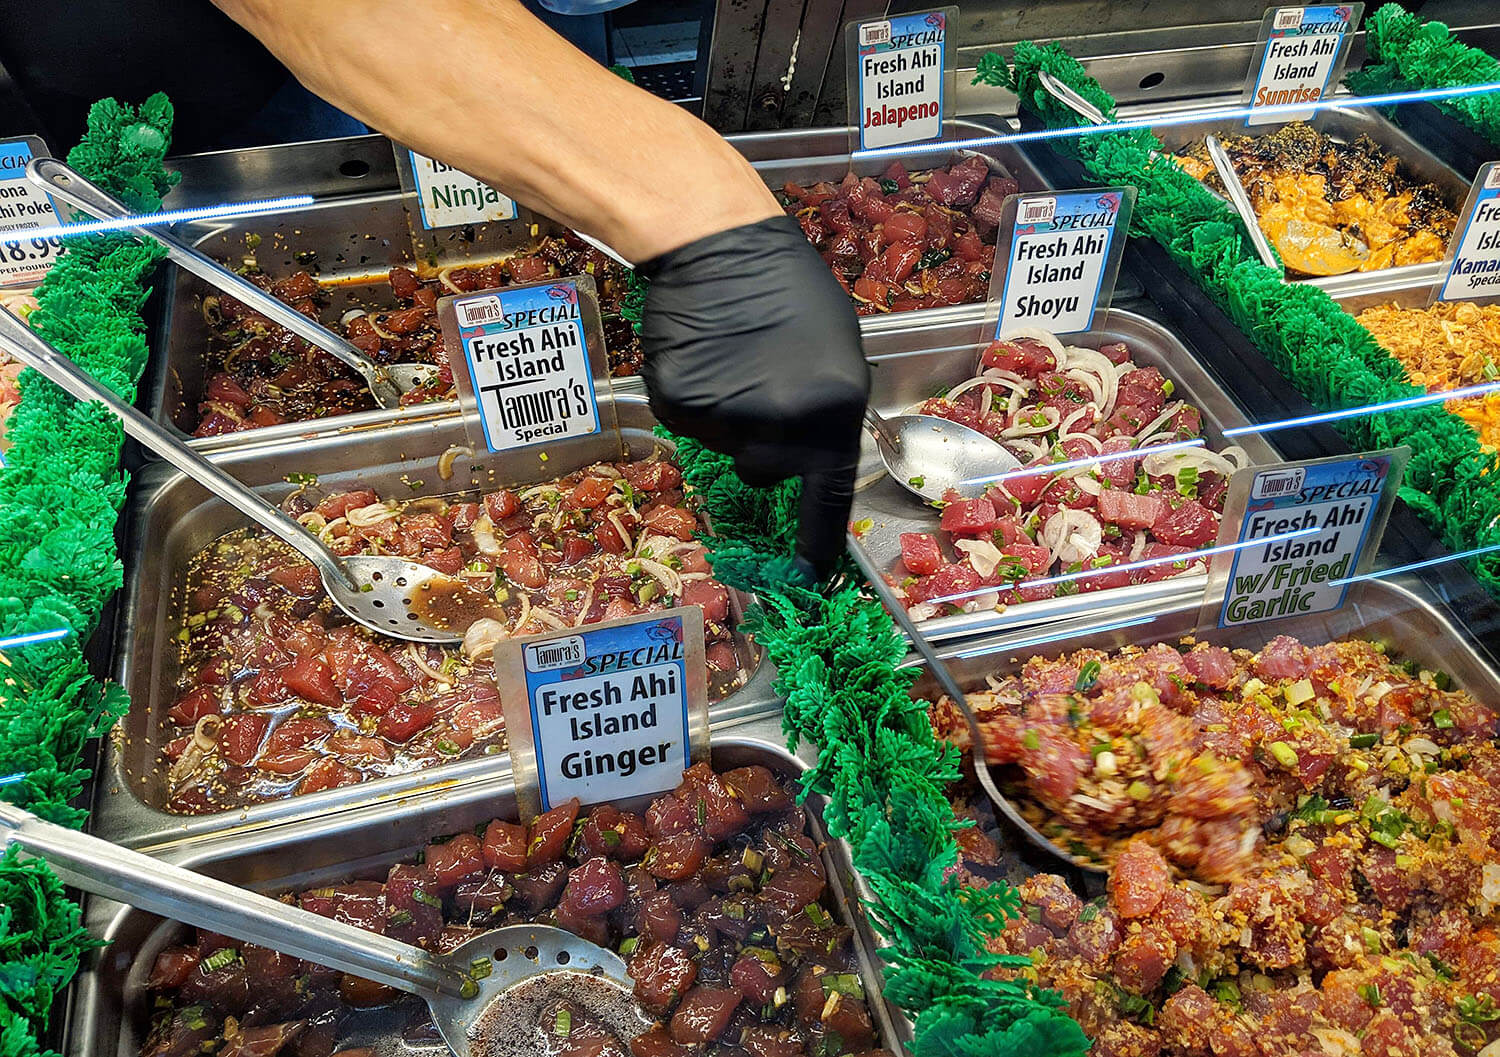 Travel Guide 12 Local Foods to Eat in Maui, Hawaii (+ Video Blog